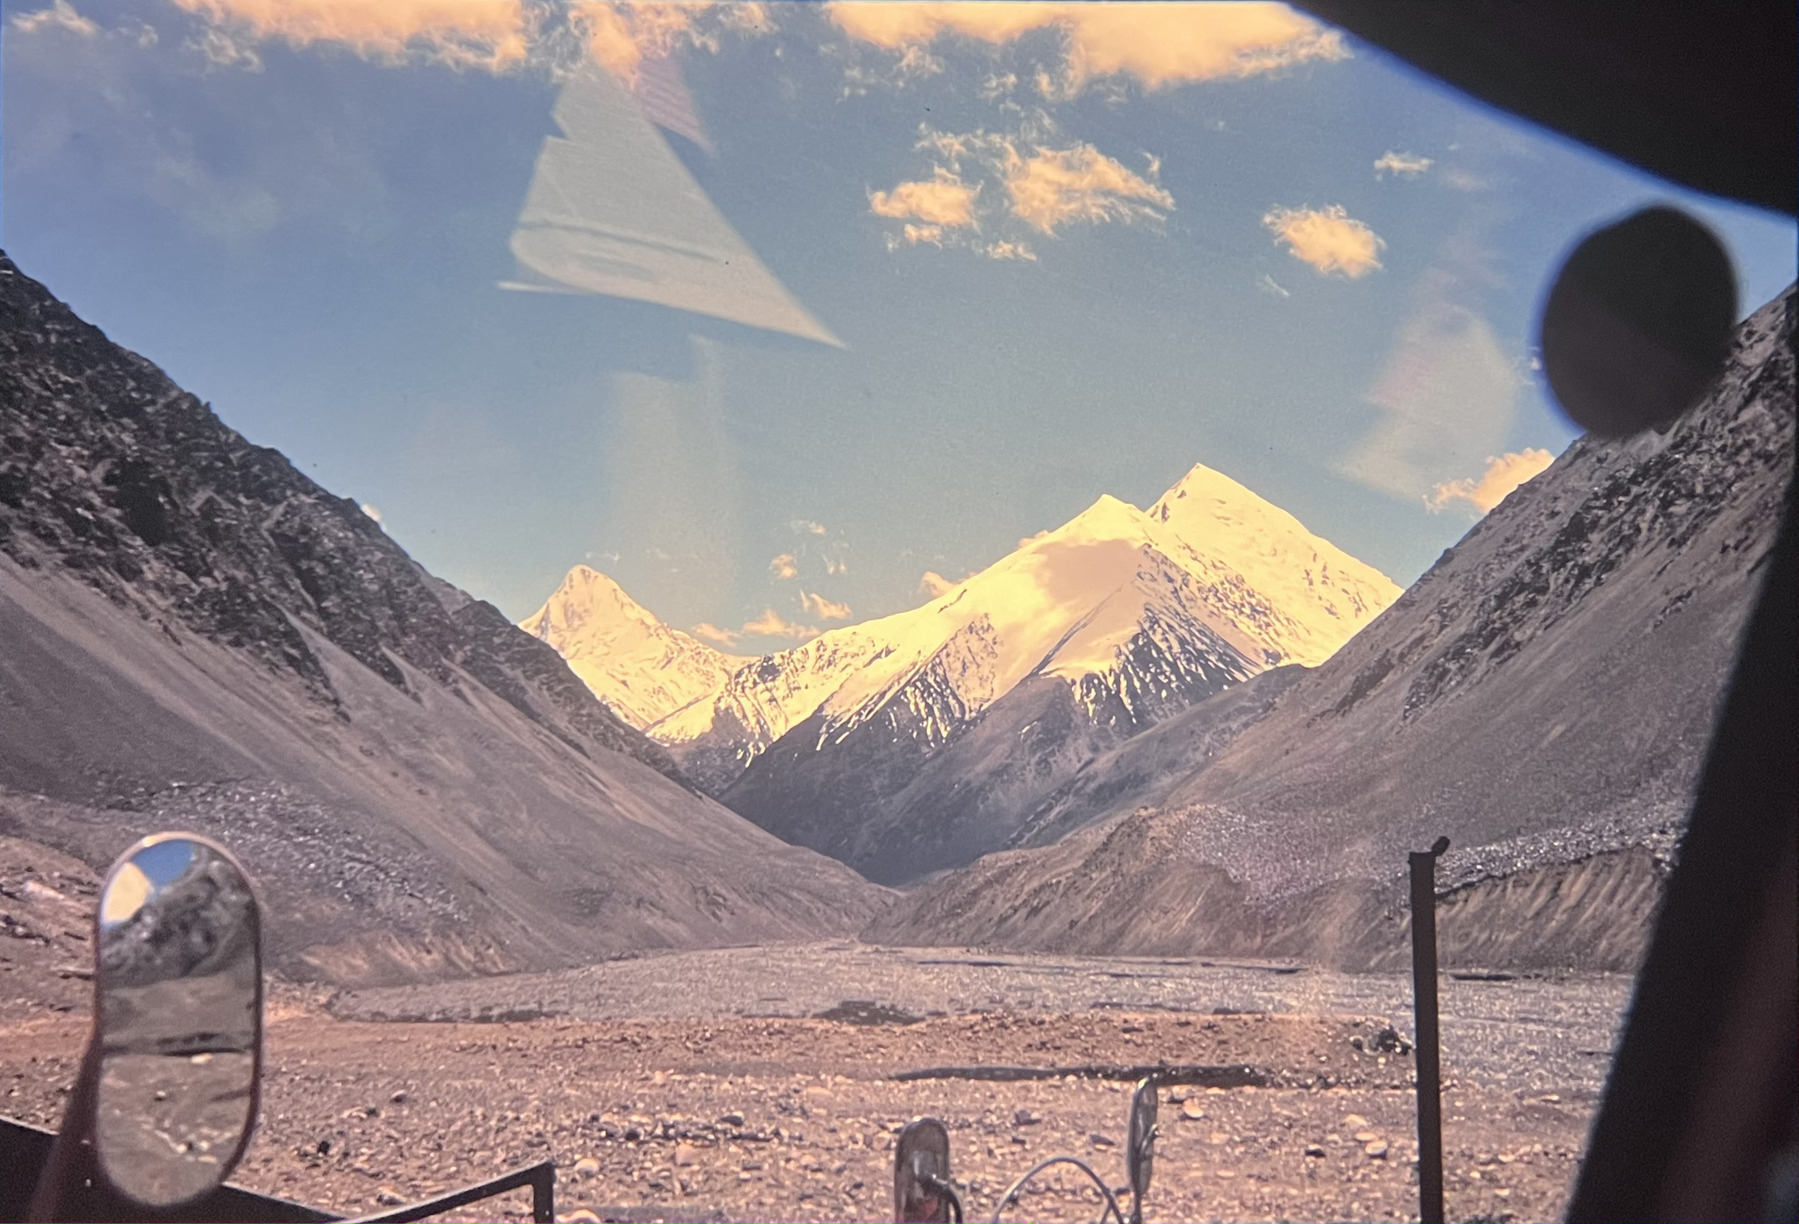 A snow-capped mountain range is visible through the windshield of a vehicle, framed by rugged, rocky terrain.